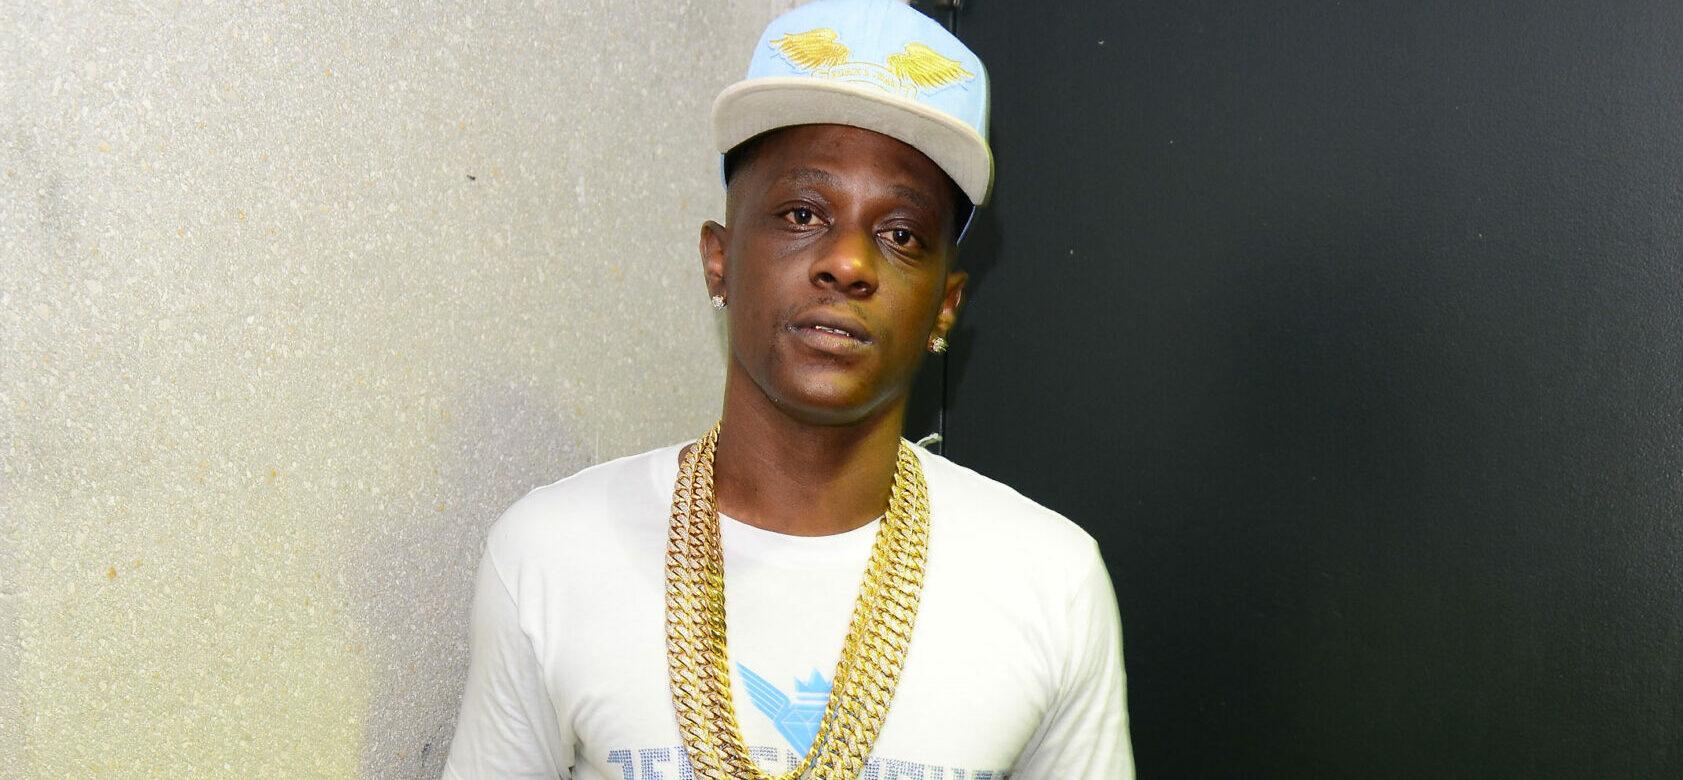 Lil’ Boosie Claims He WON’T Be Canceled Following Homophobic Tirade